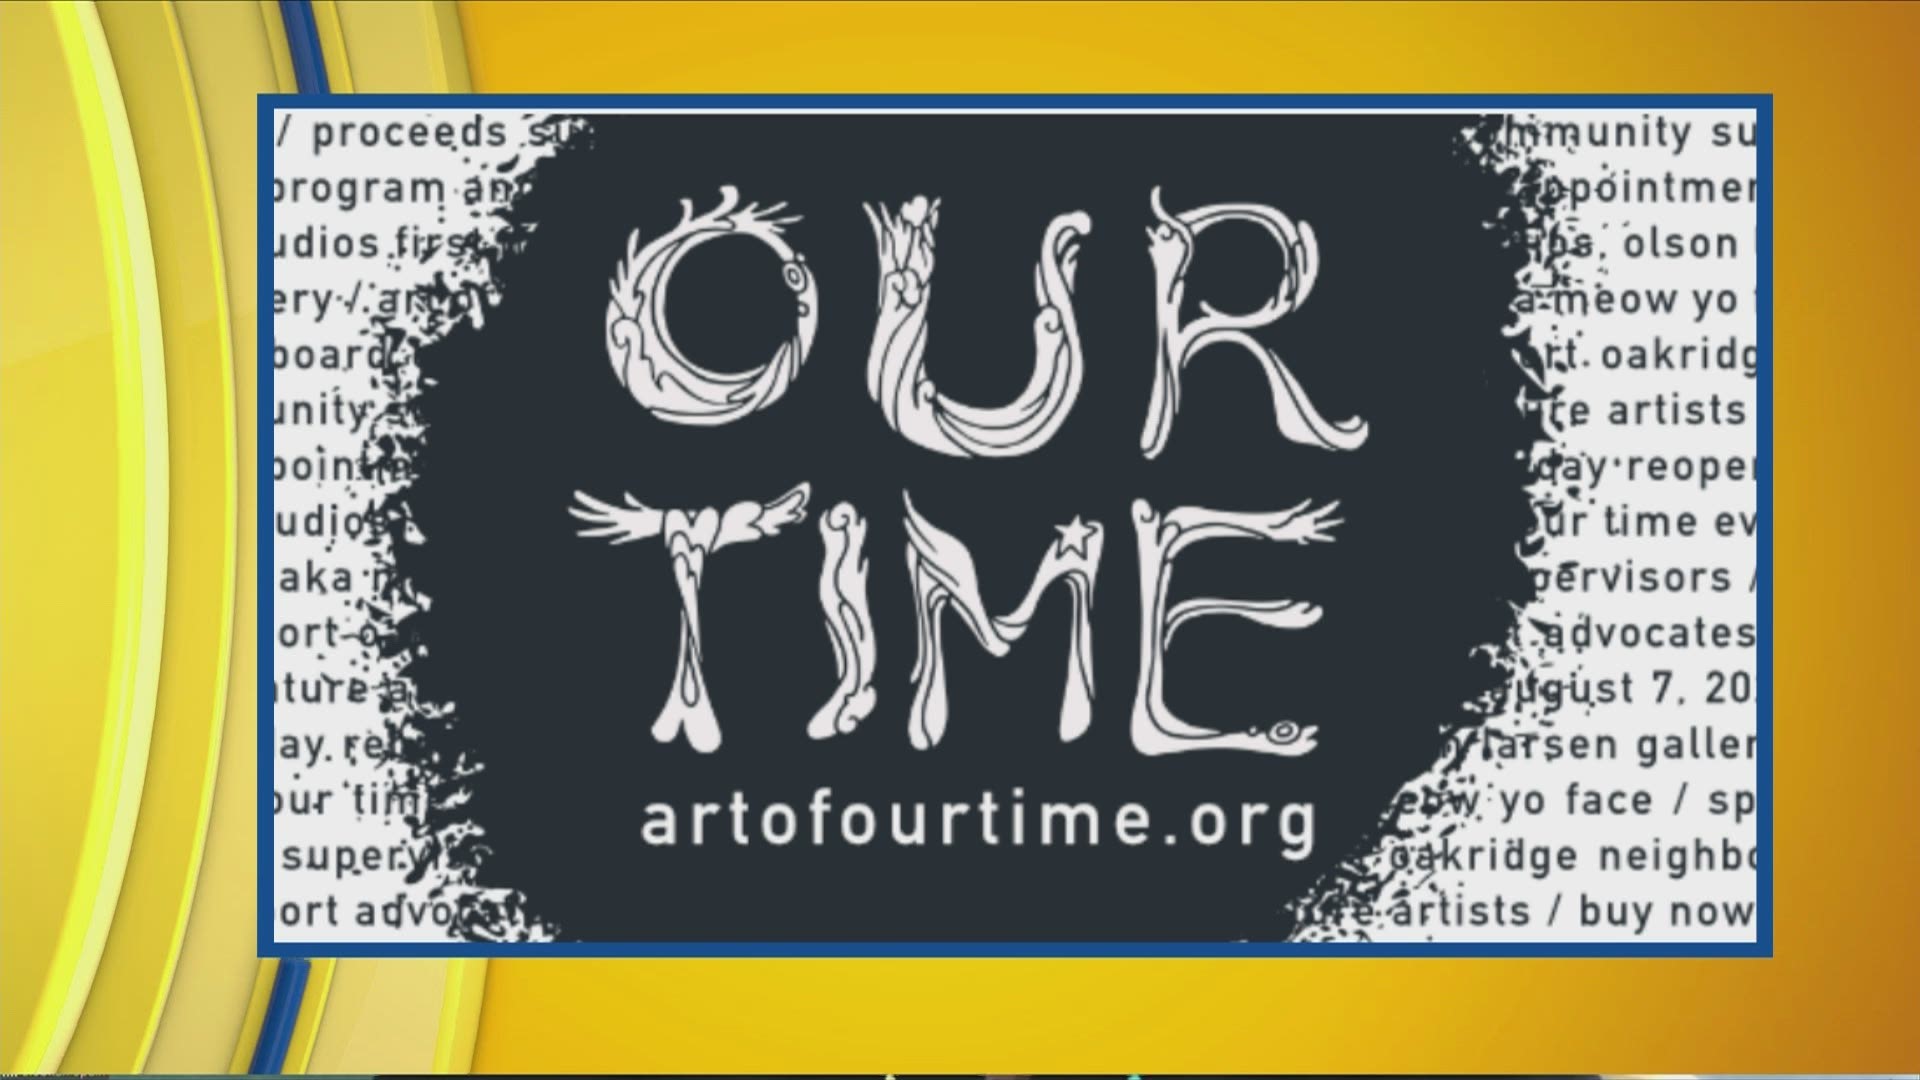 Mainframe Studios is reopening their First Friday open studio events with 'Art of Our Time'